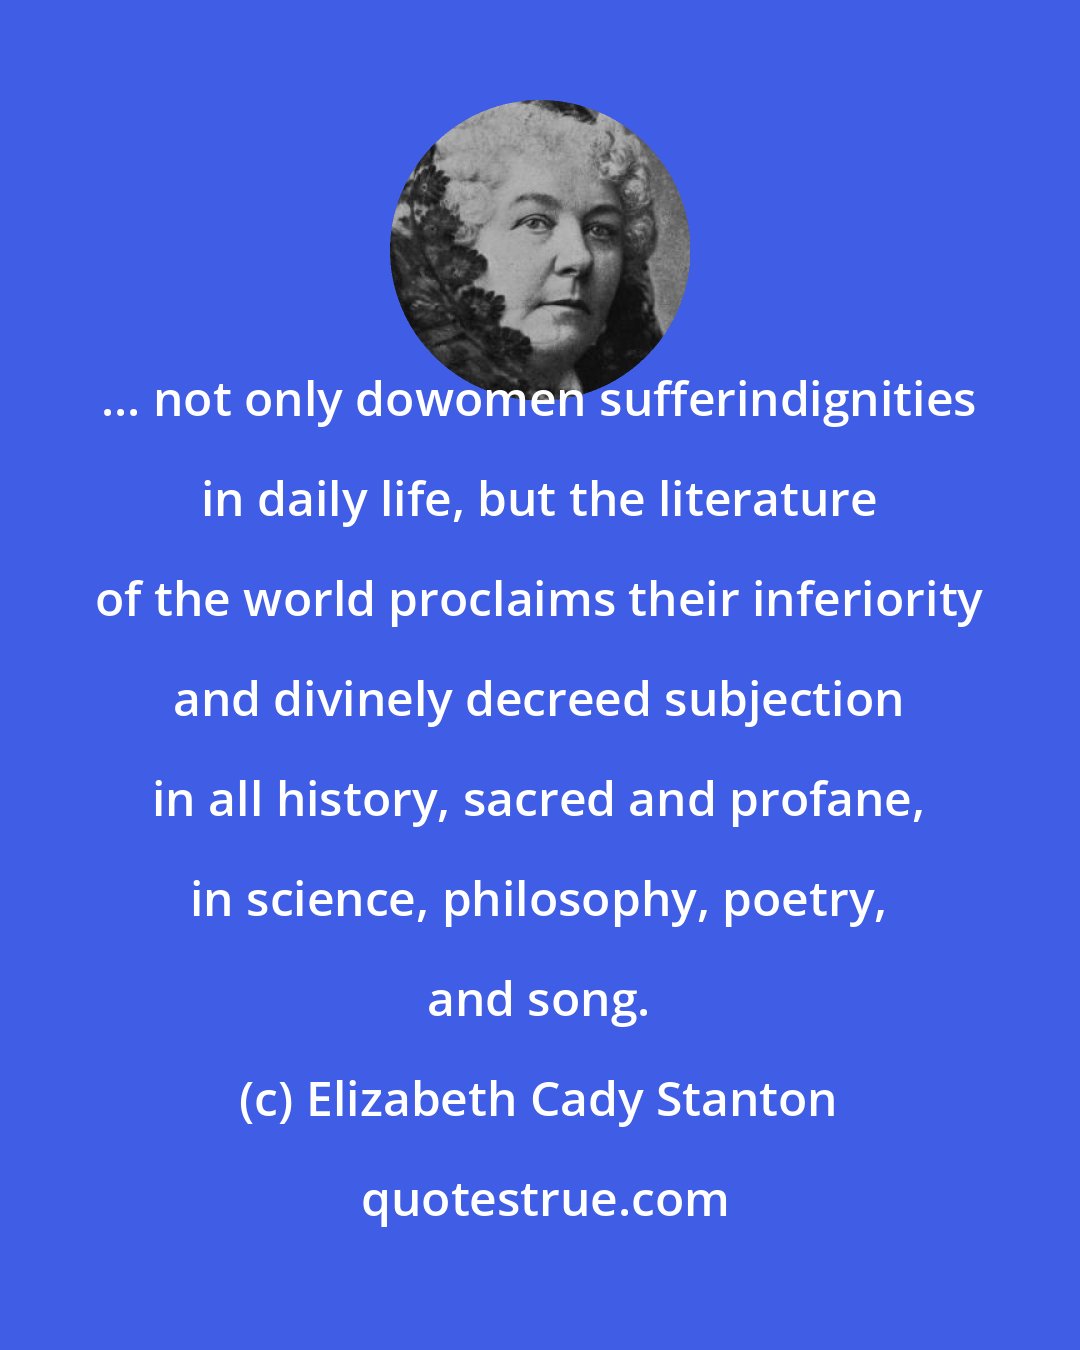 Elizabeth Cady Stanton: ... not only dowomen sufferindignities in daily life, but the literature of the world proclaims their inferiority and divinely decreed subjection in all history, sacred and profane, in science, philosophy, poetry, and song.